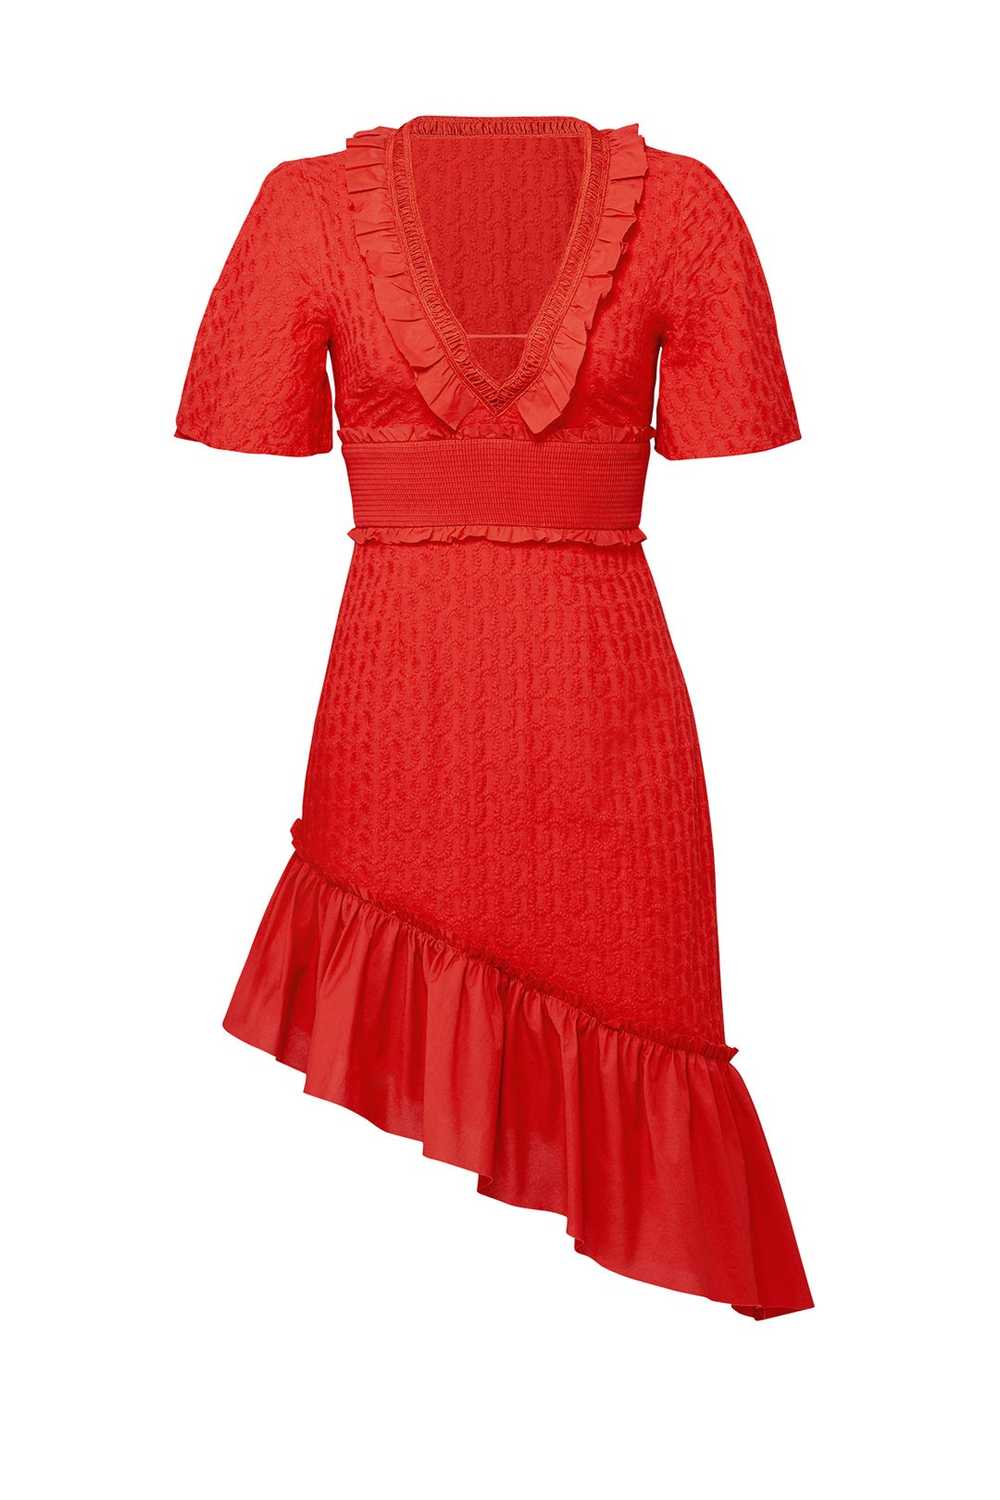 FINDERS KEEPERS Red Memento Dress - image 4